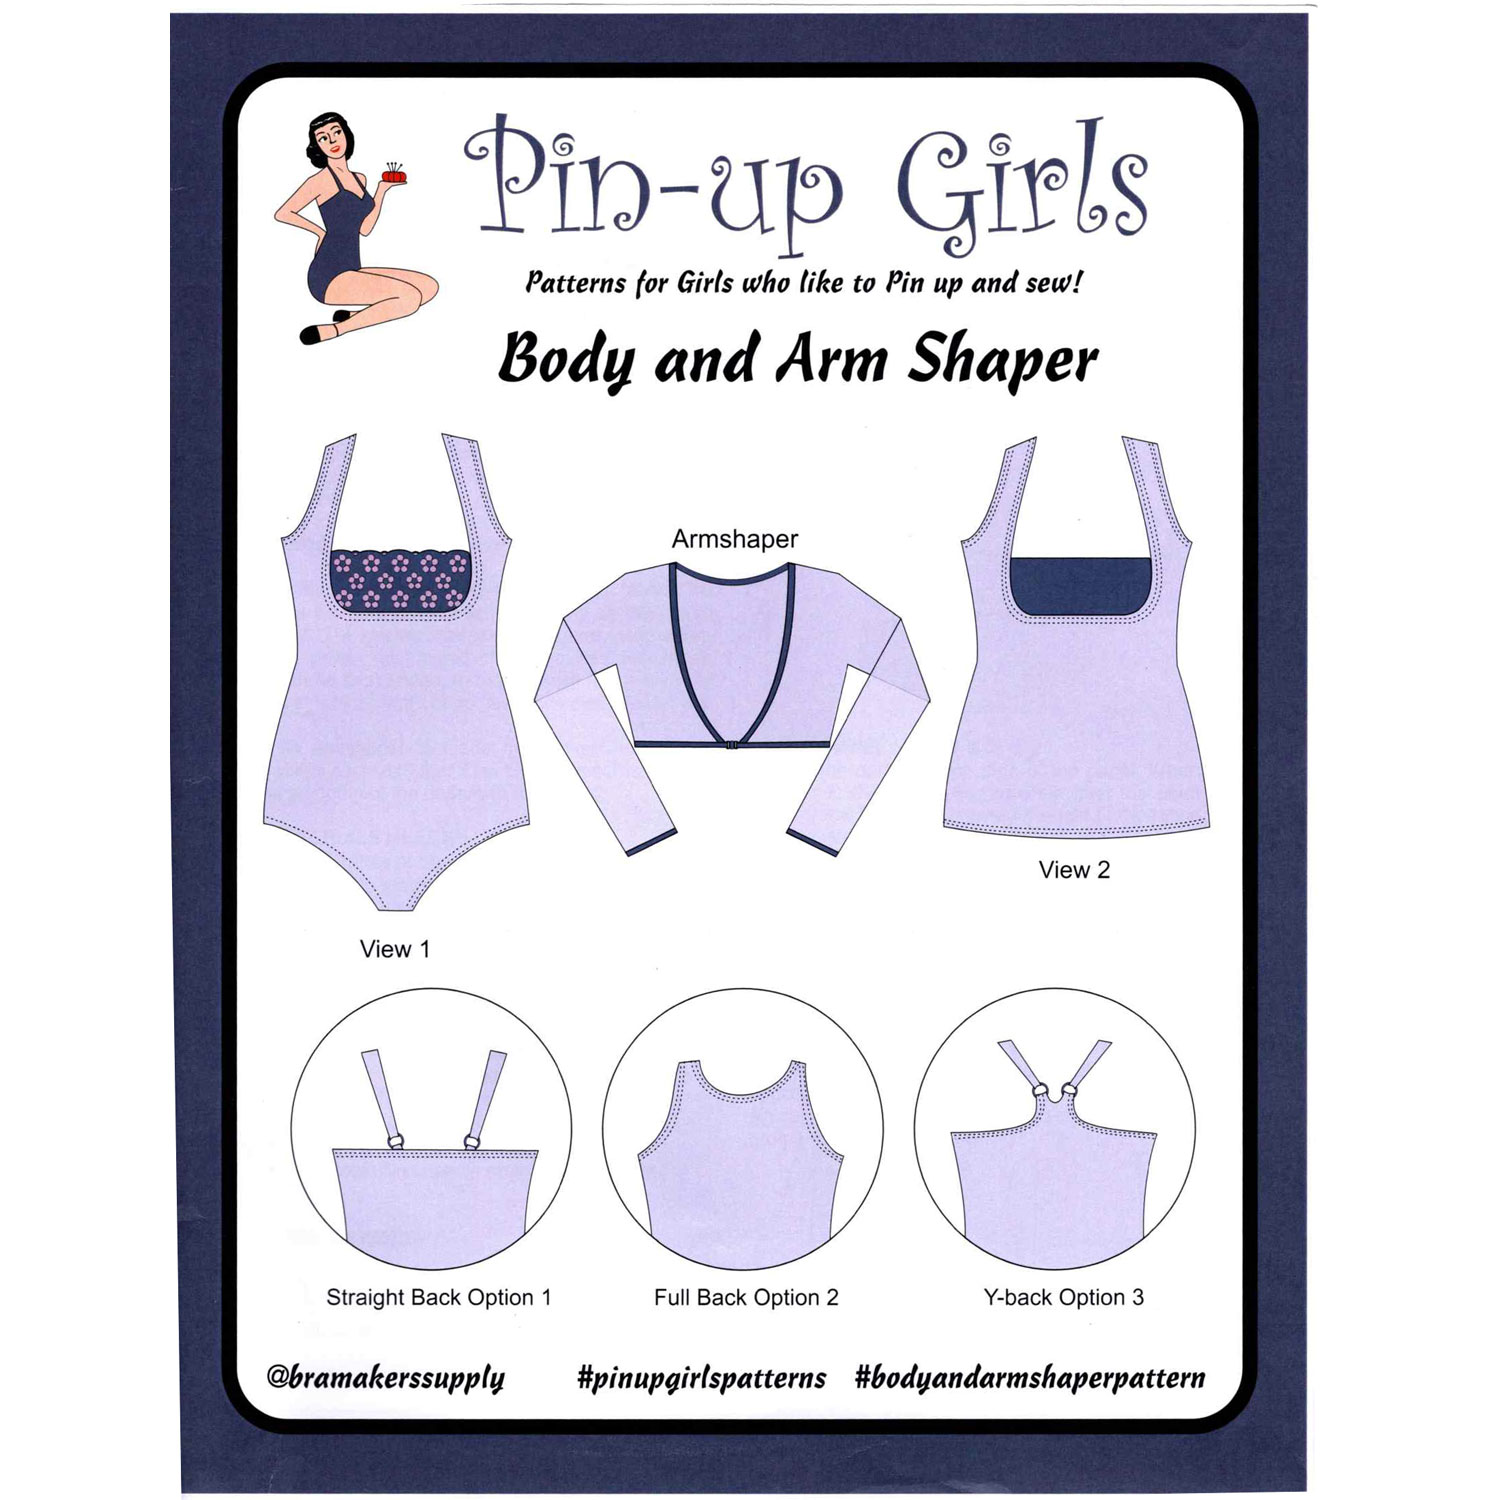 Pin-Up Girls: Body and Arm Shapers from CorsetMakingSupplies.com